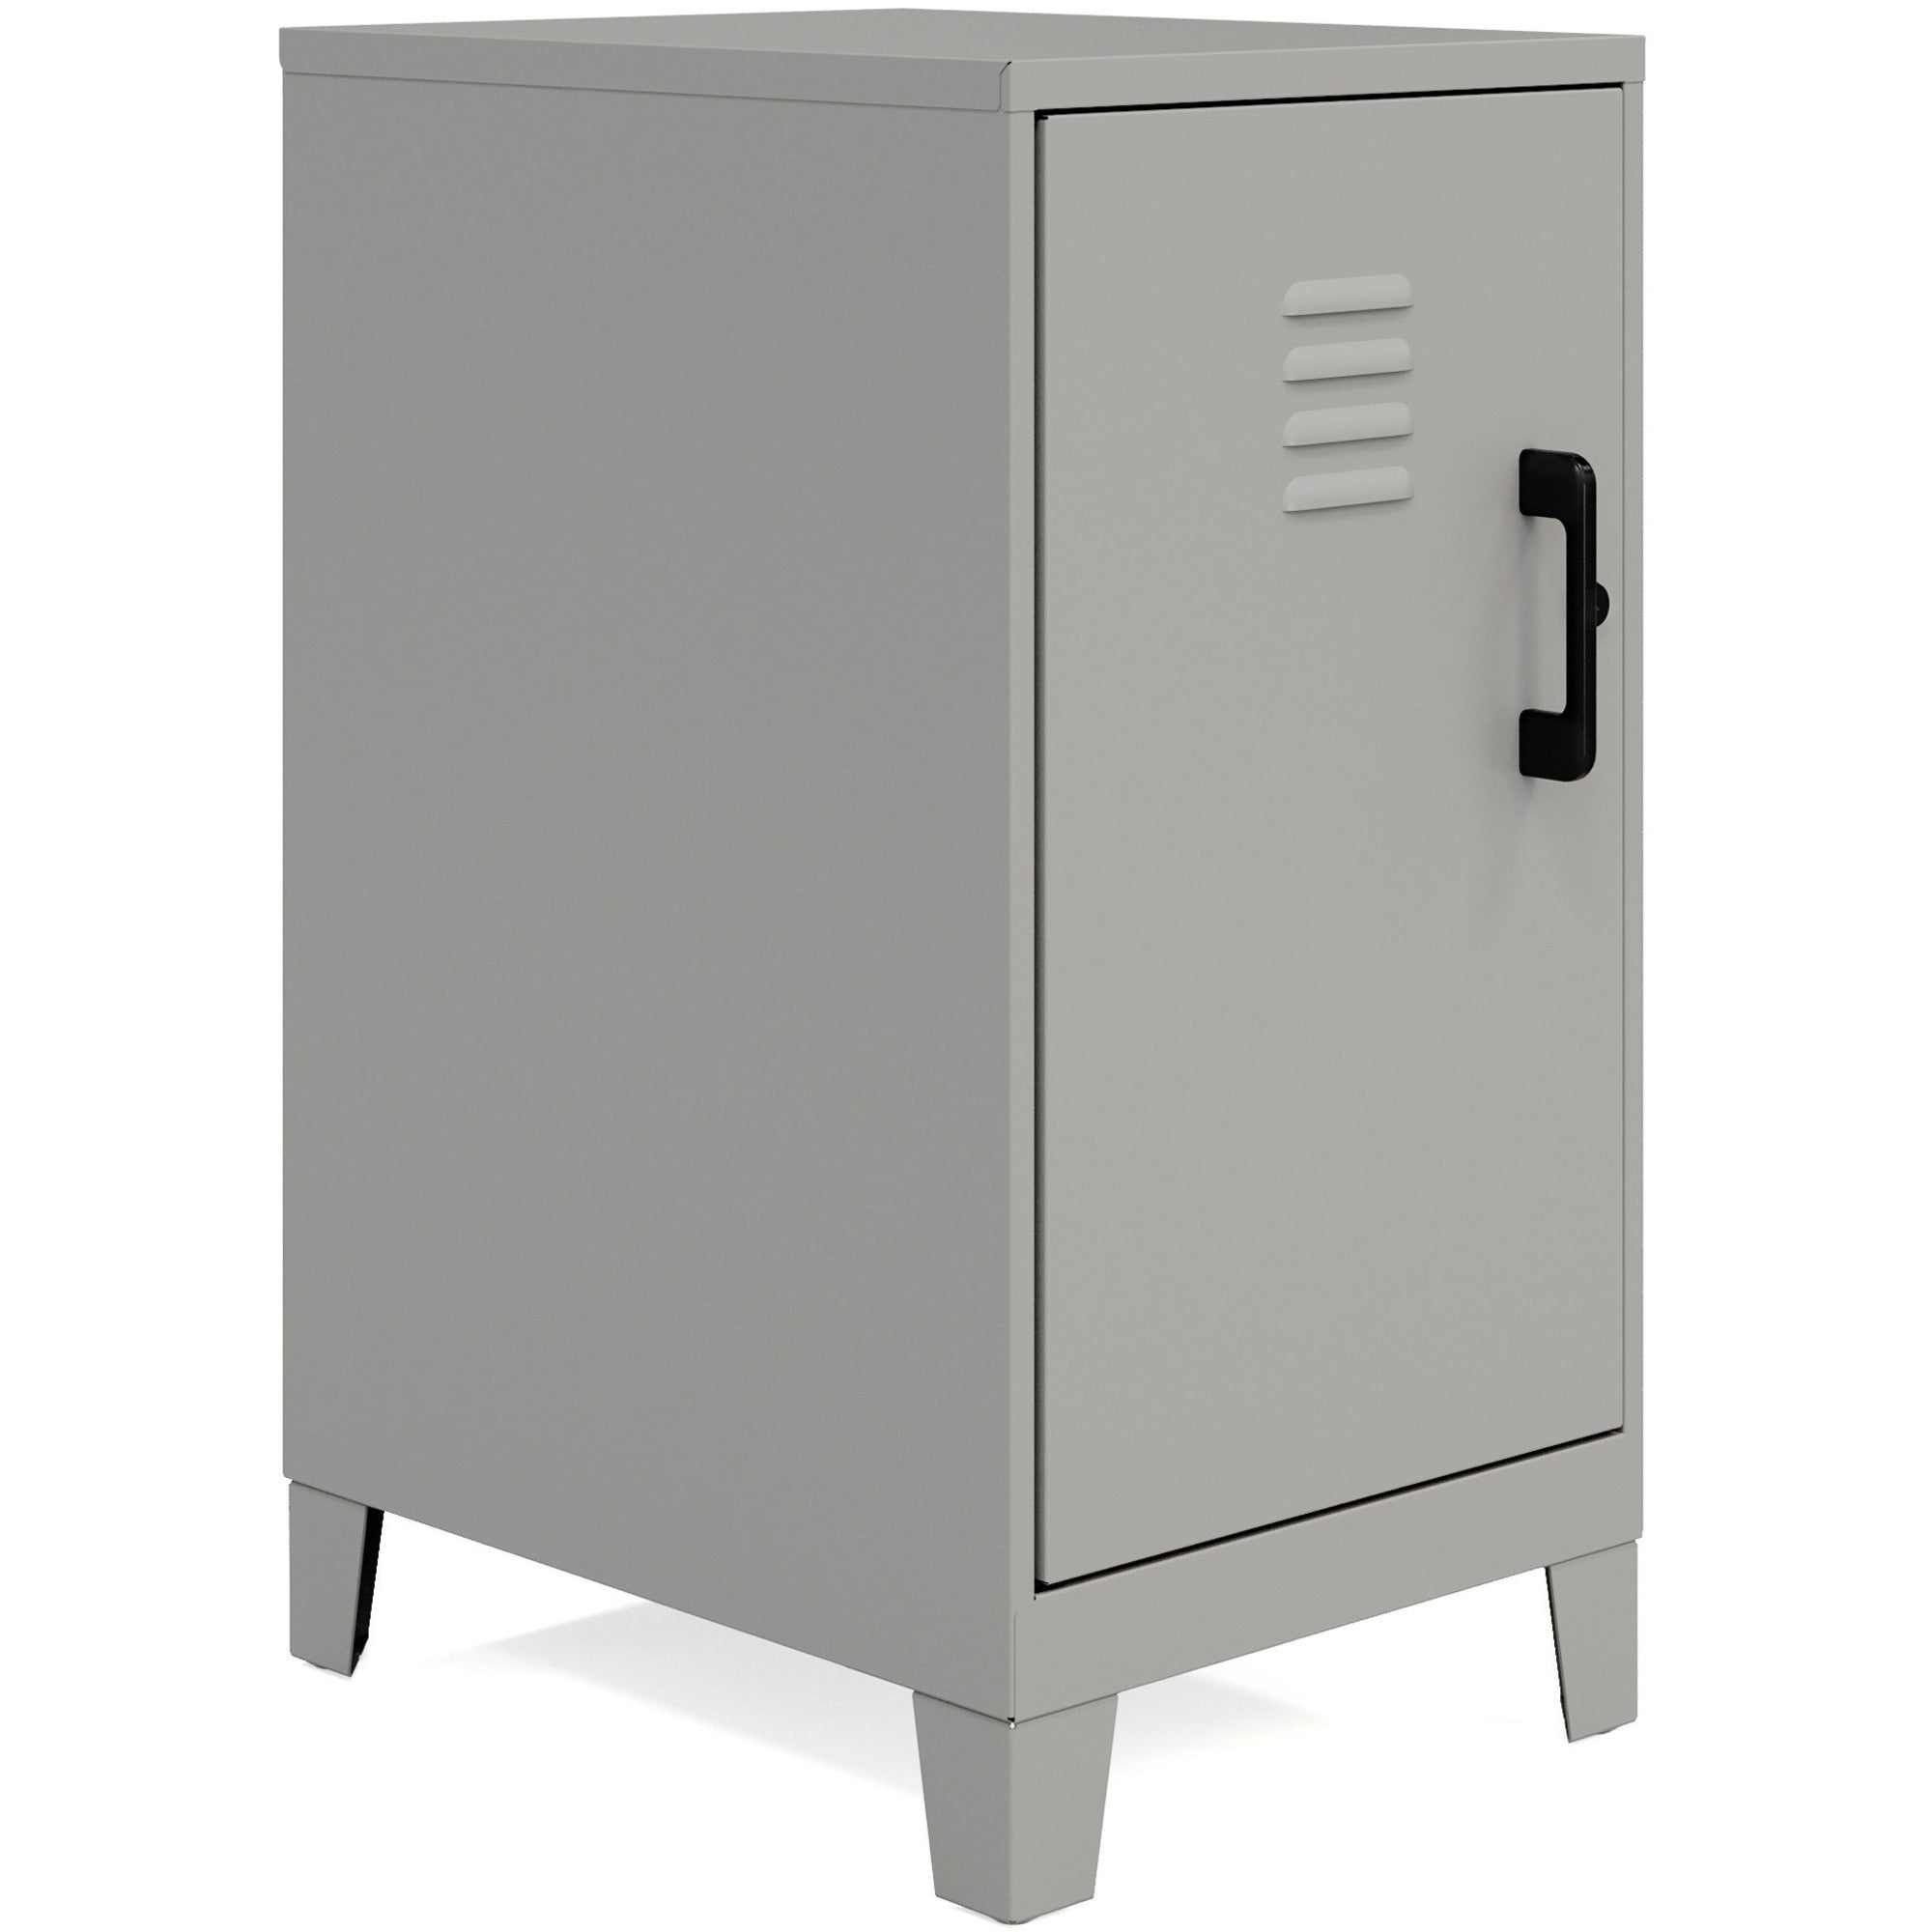 nusparc-personal-locker-2-shelves-for-office-home-sport-equipments-toy-game-classroom-playroom-basement-garage-overall-size-275-x-142-x-18-silver-steel-taa-compliant_nprsl218zzsr - 1